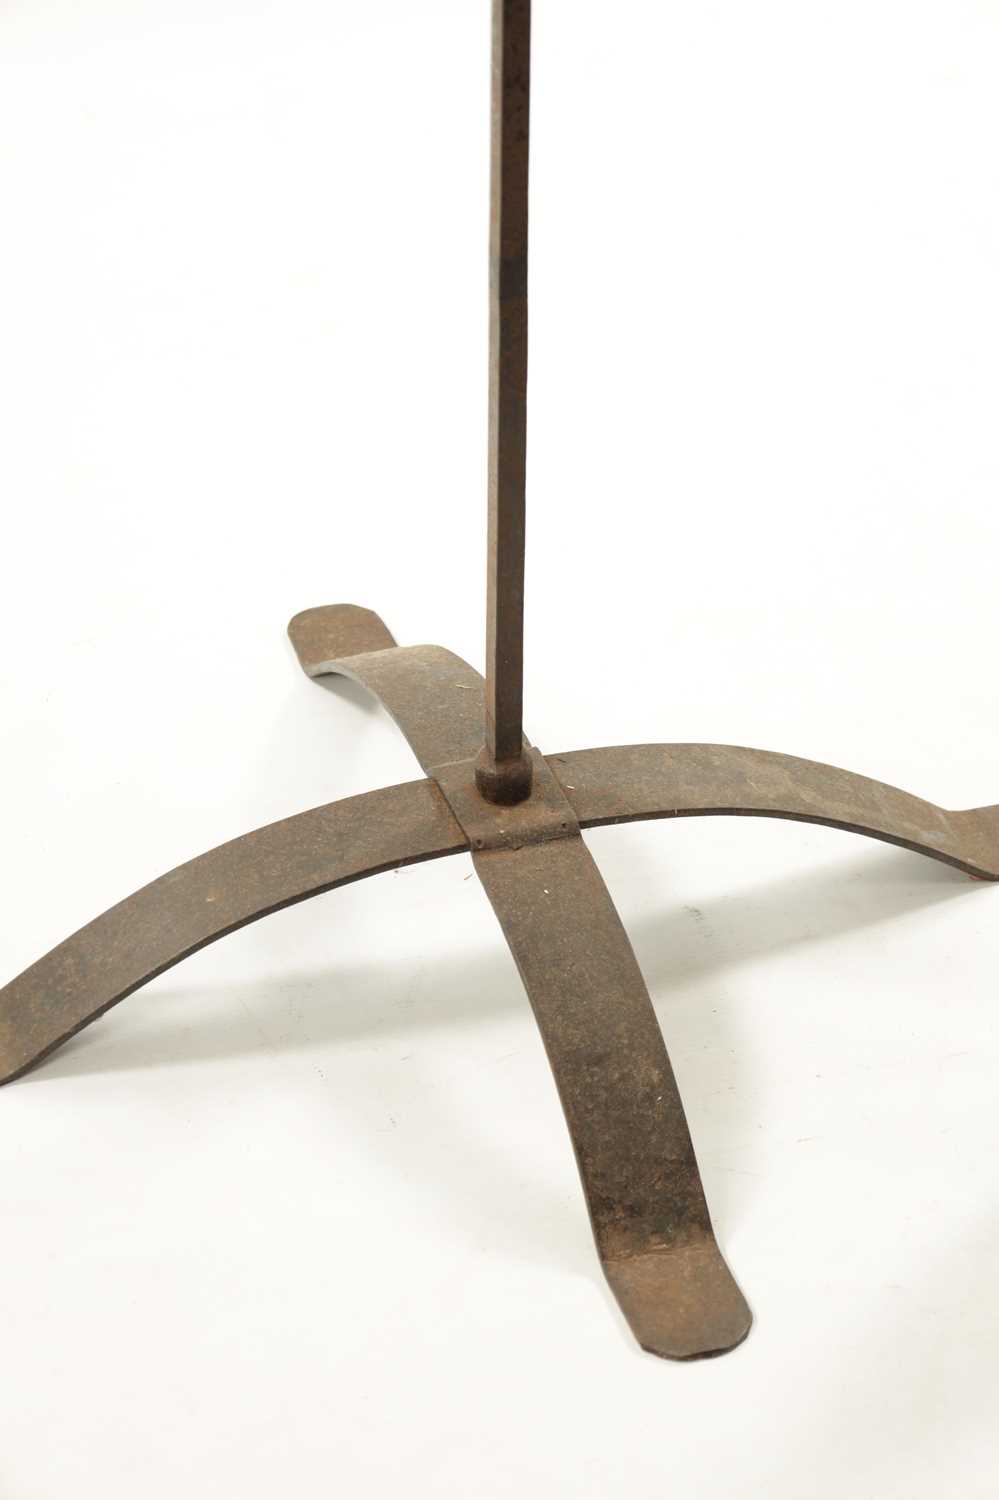 AN 18TH / 19TH CENTURY WROUGHT IRON FLOOR STANDING CANDLESTICK - Image 4 of 4